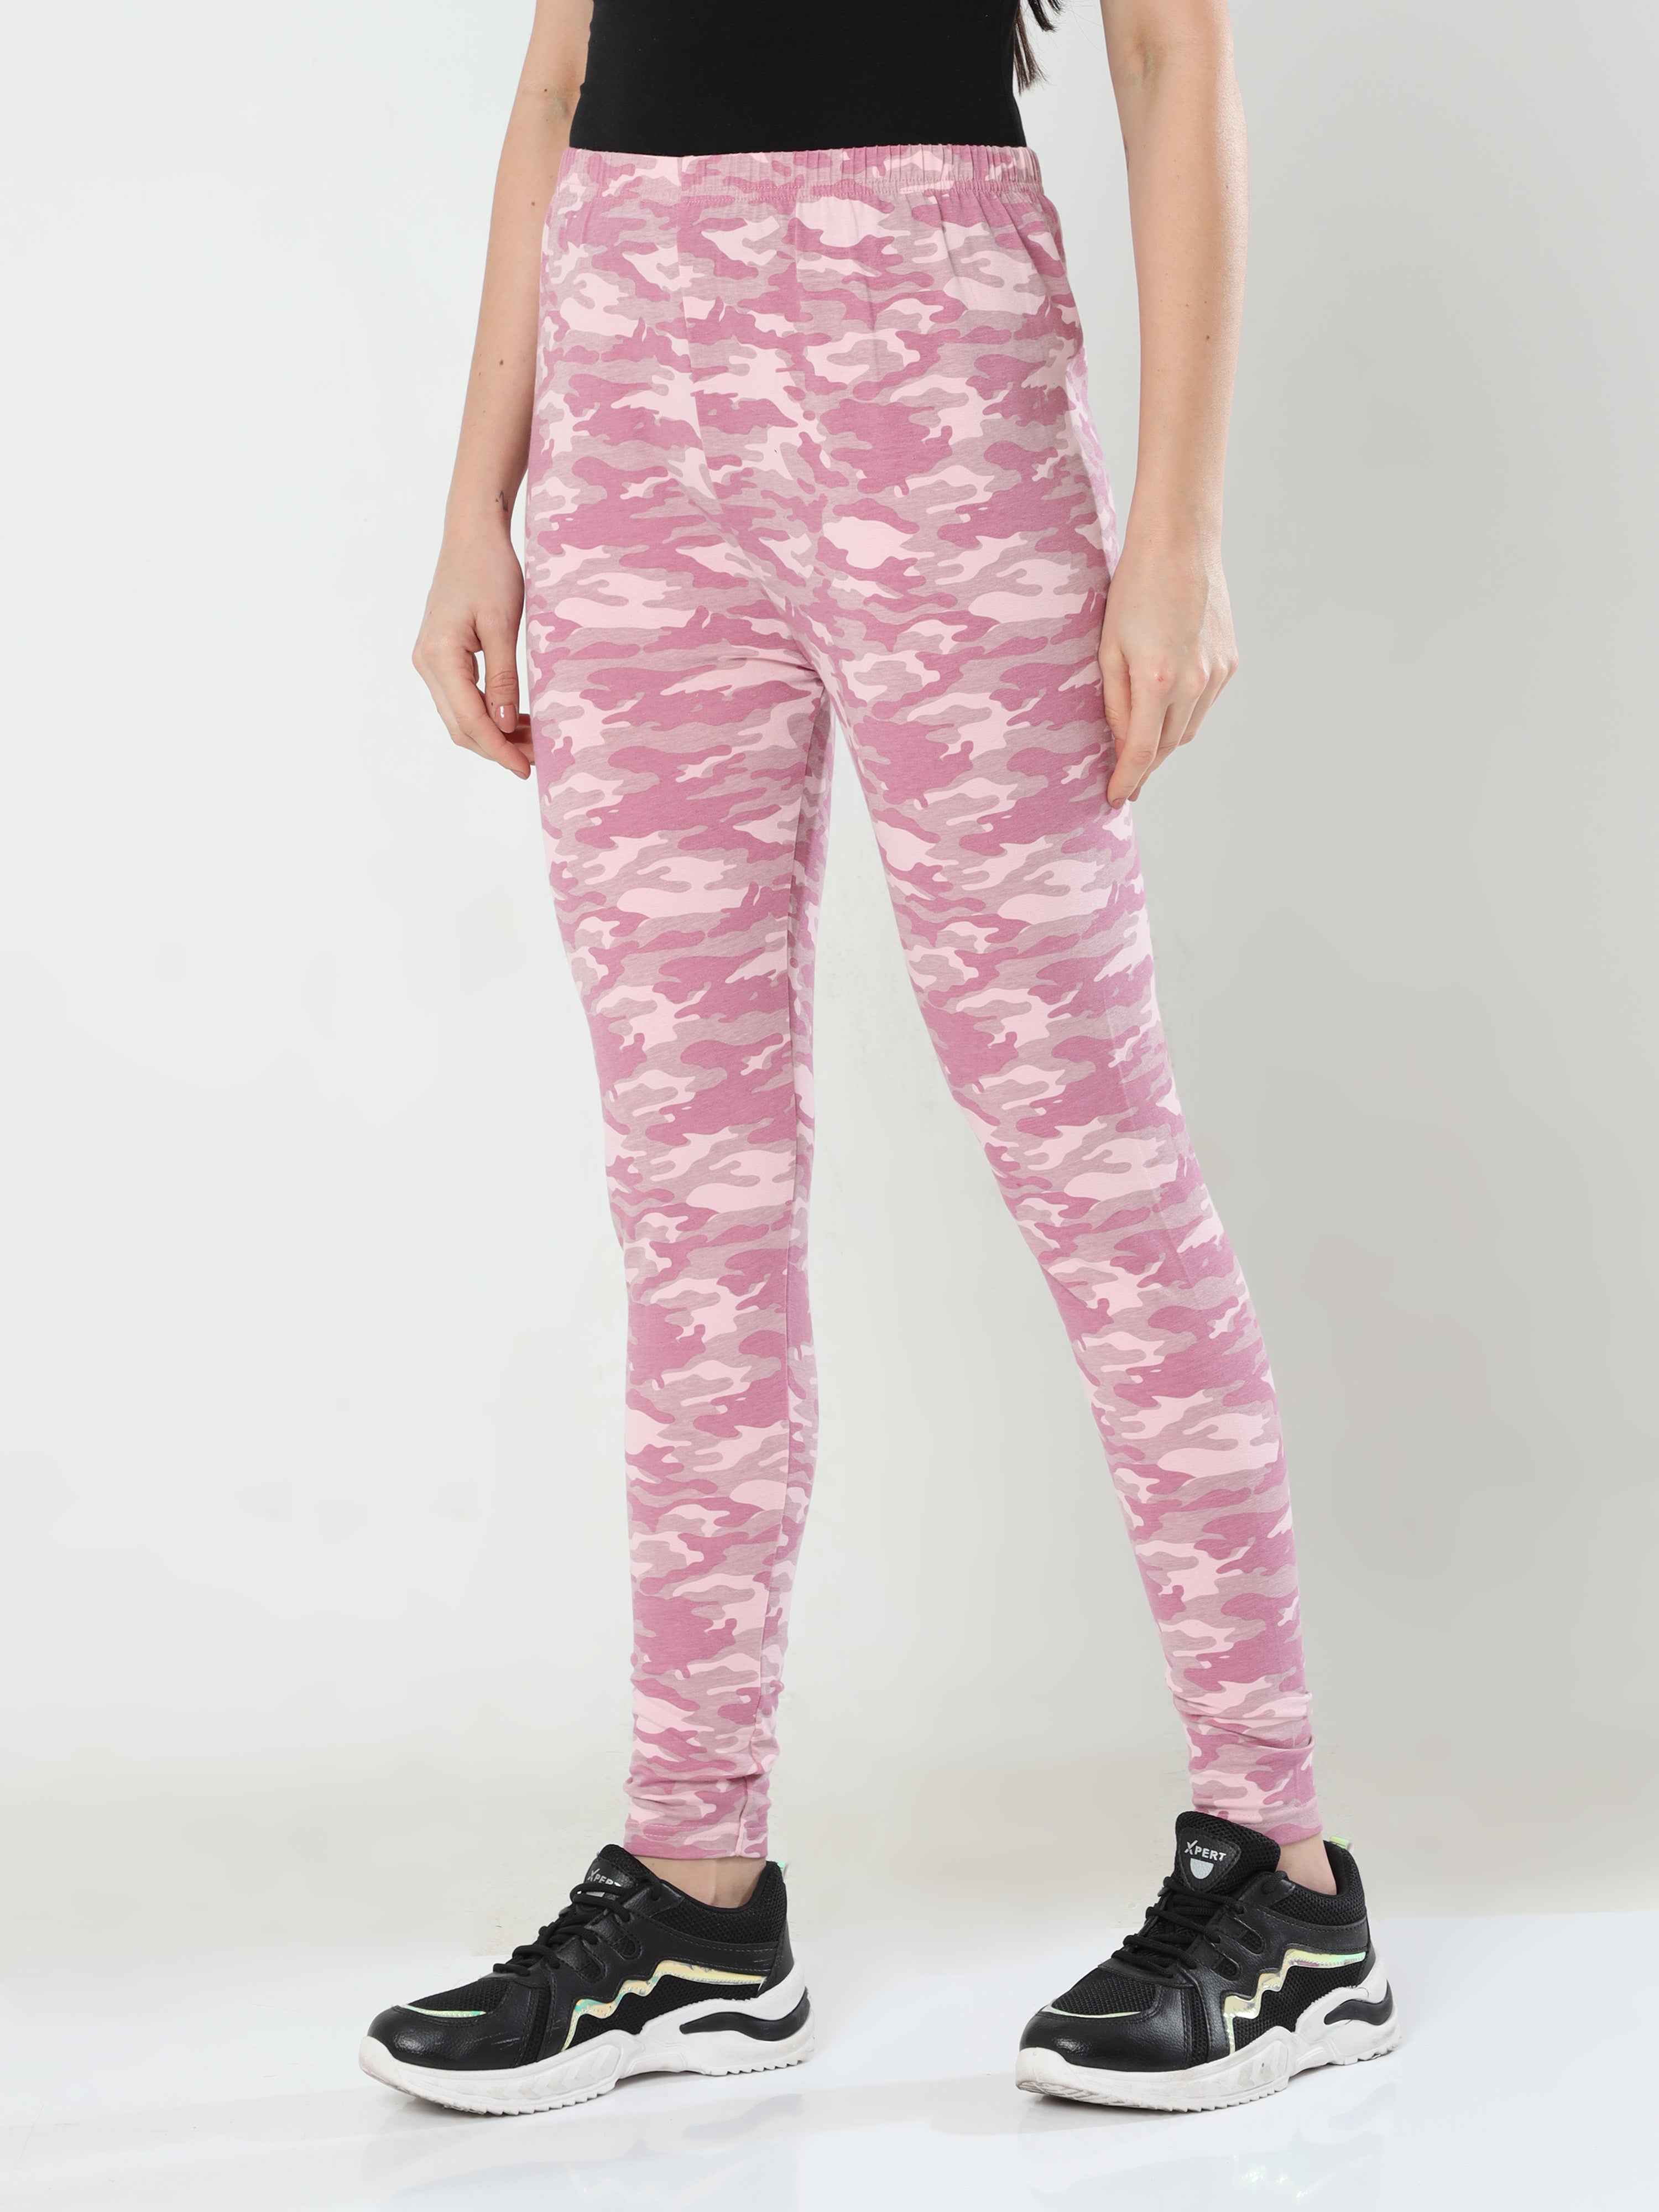 Buy DKNY Black Printed Leggings Online - 606884 | The Collective